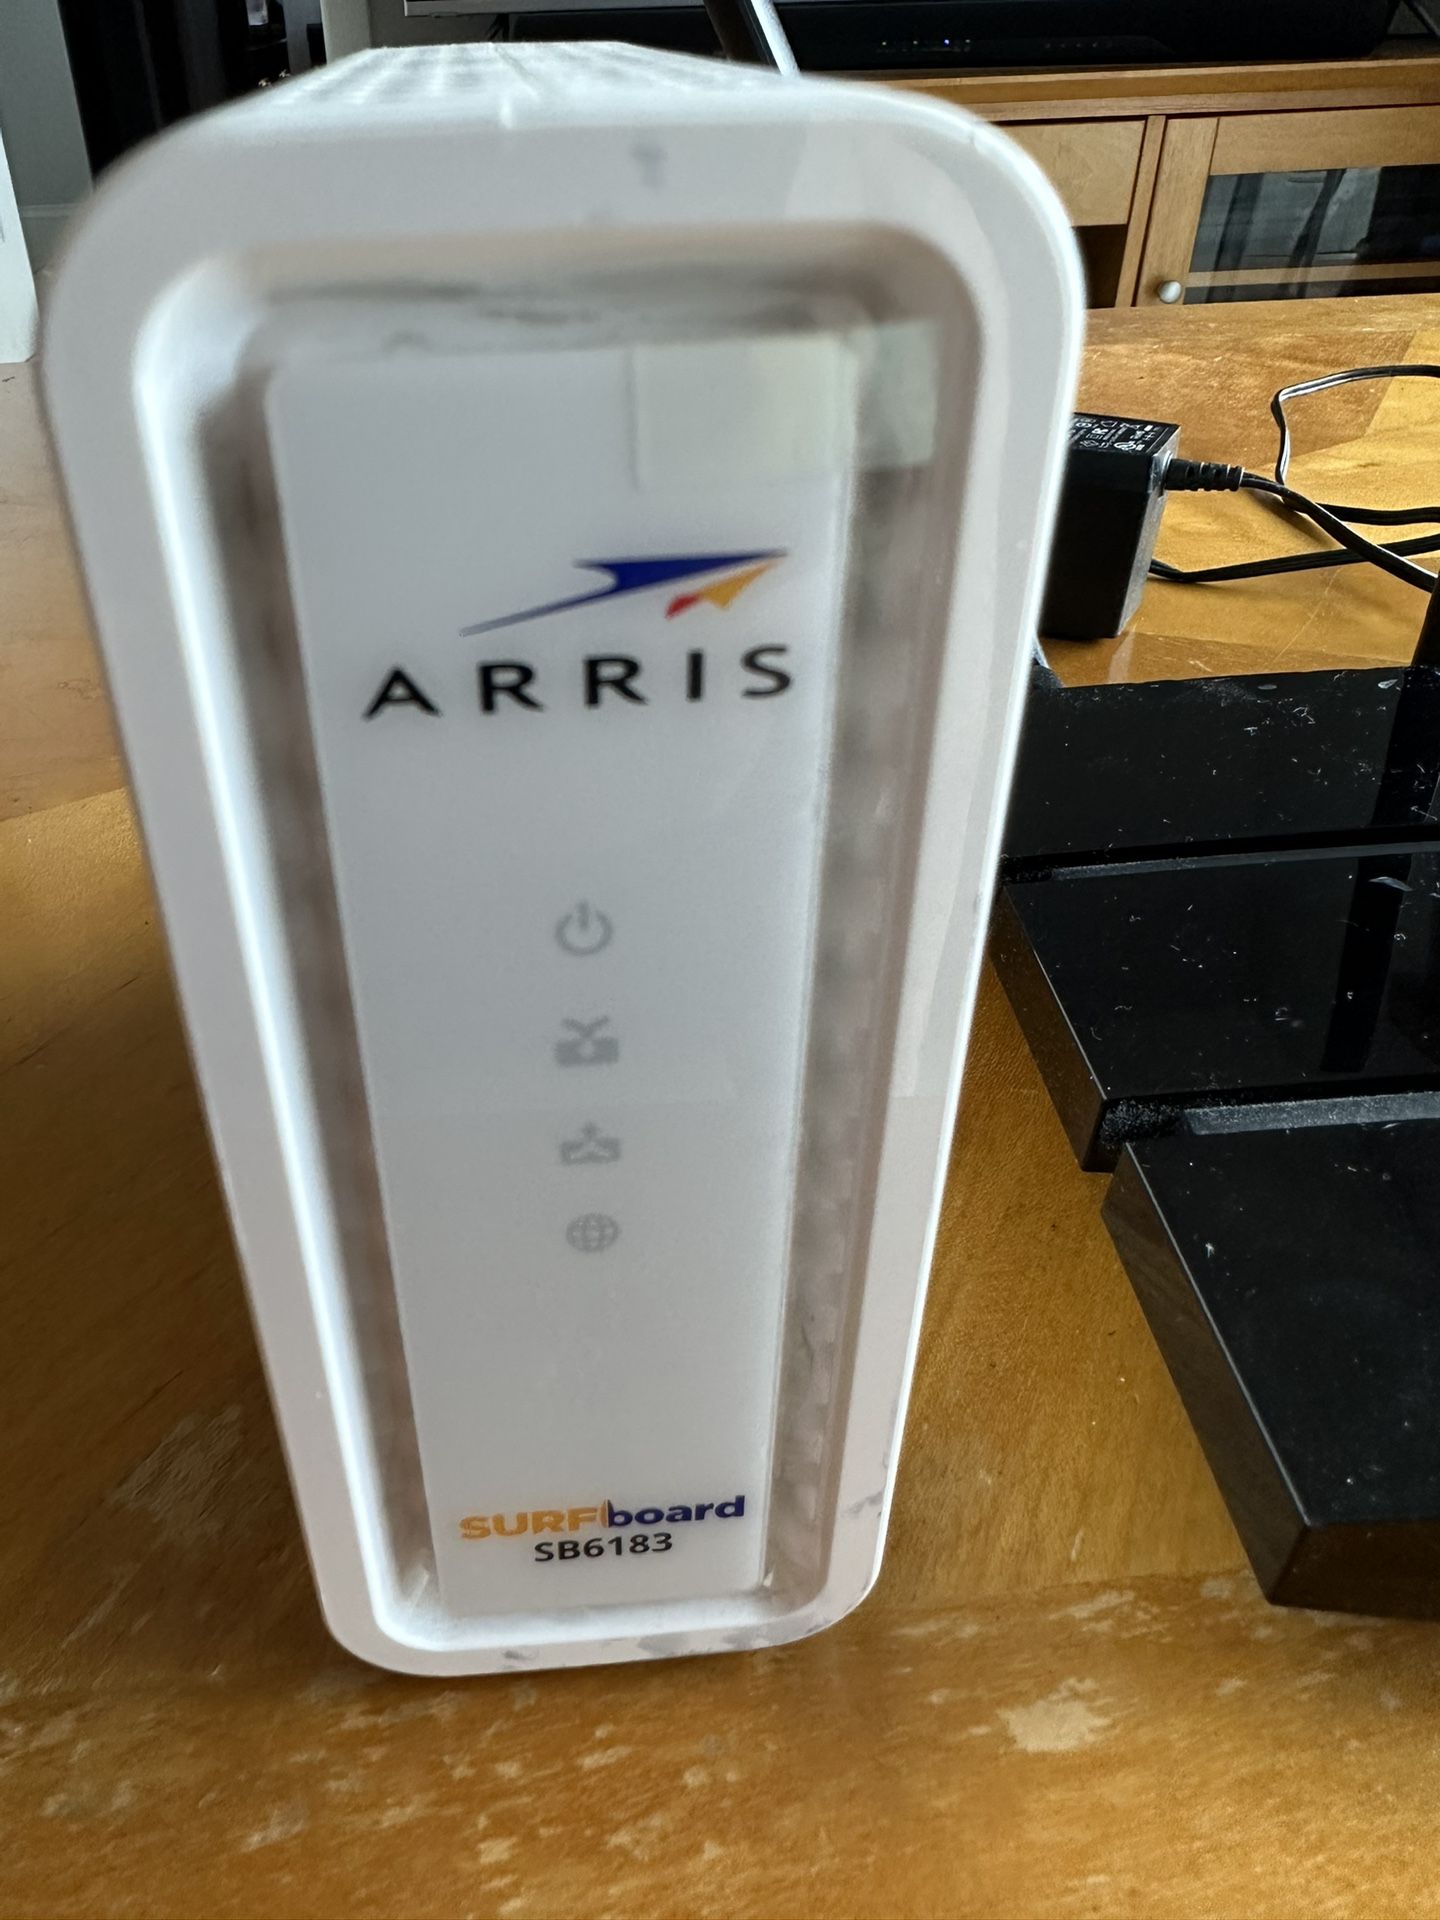 Arris Modem and TP Link Router $30.00